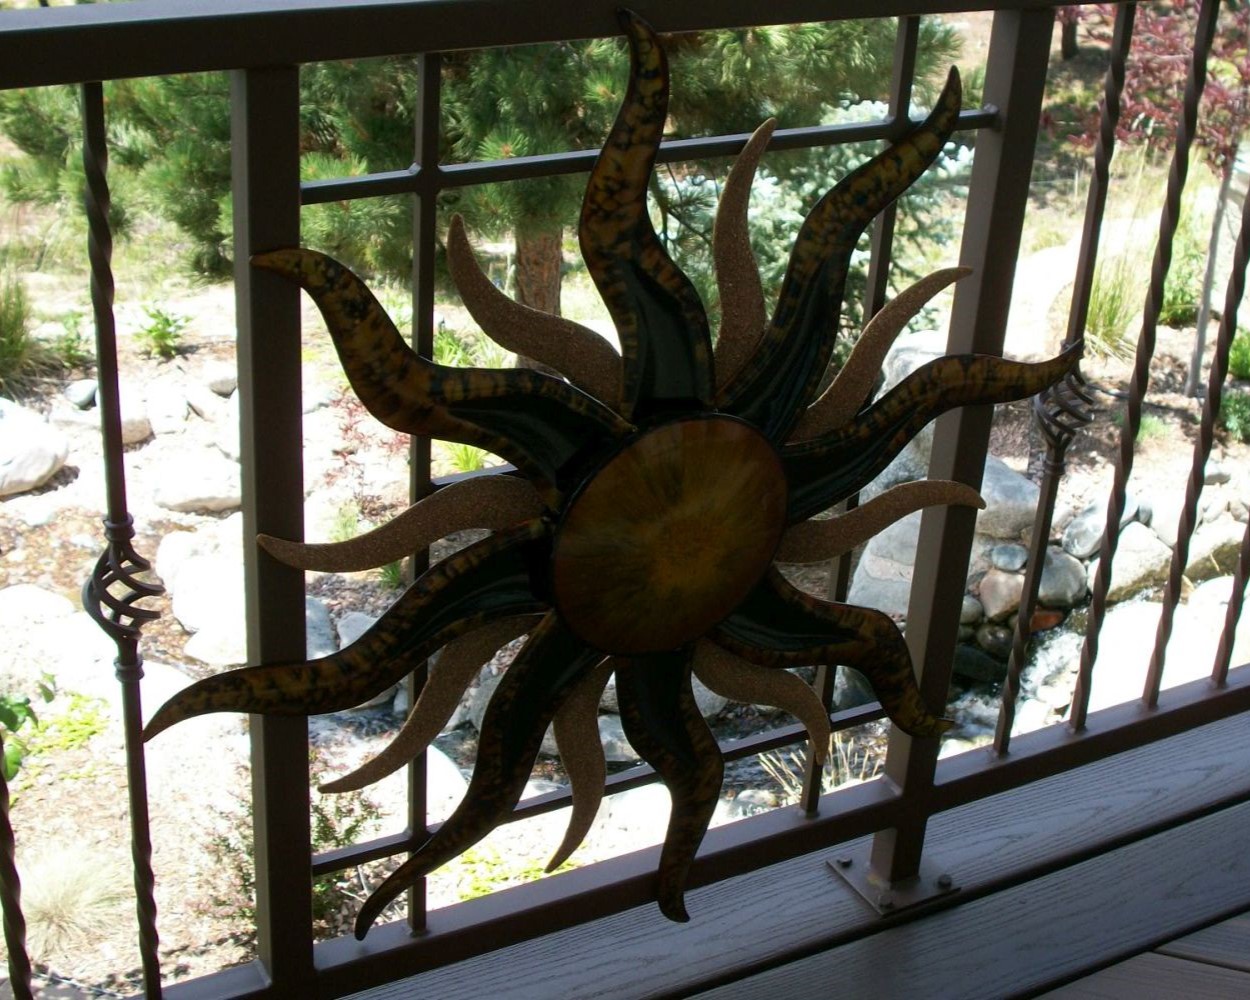 Metal panel railing system that was designed to showcase a piece of art (that looks like a sun) the homeowners wanted to showcase.